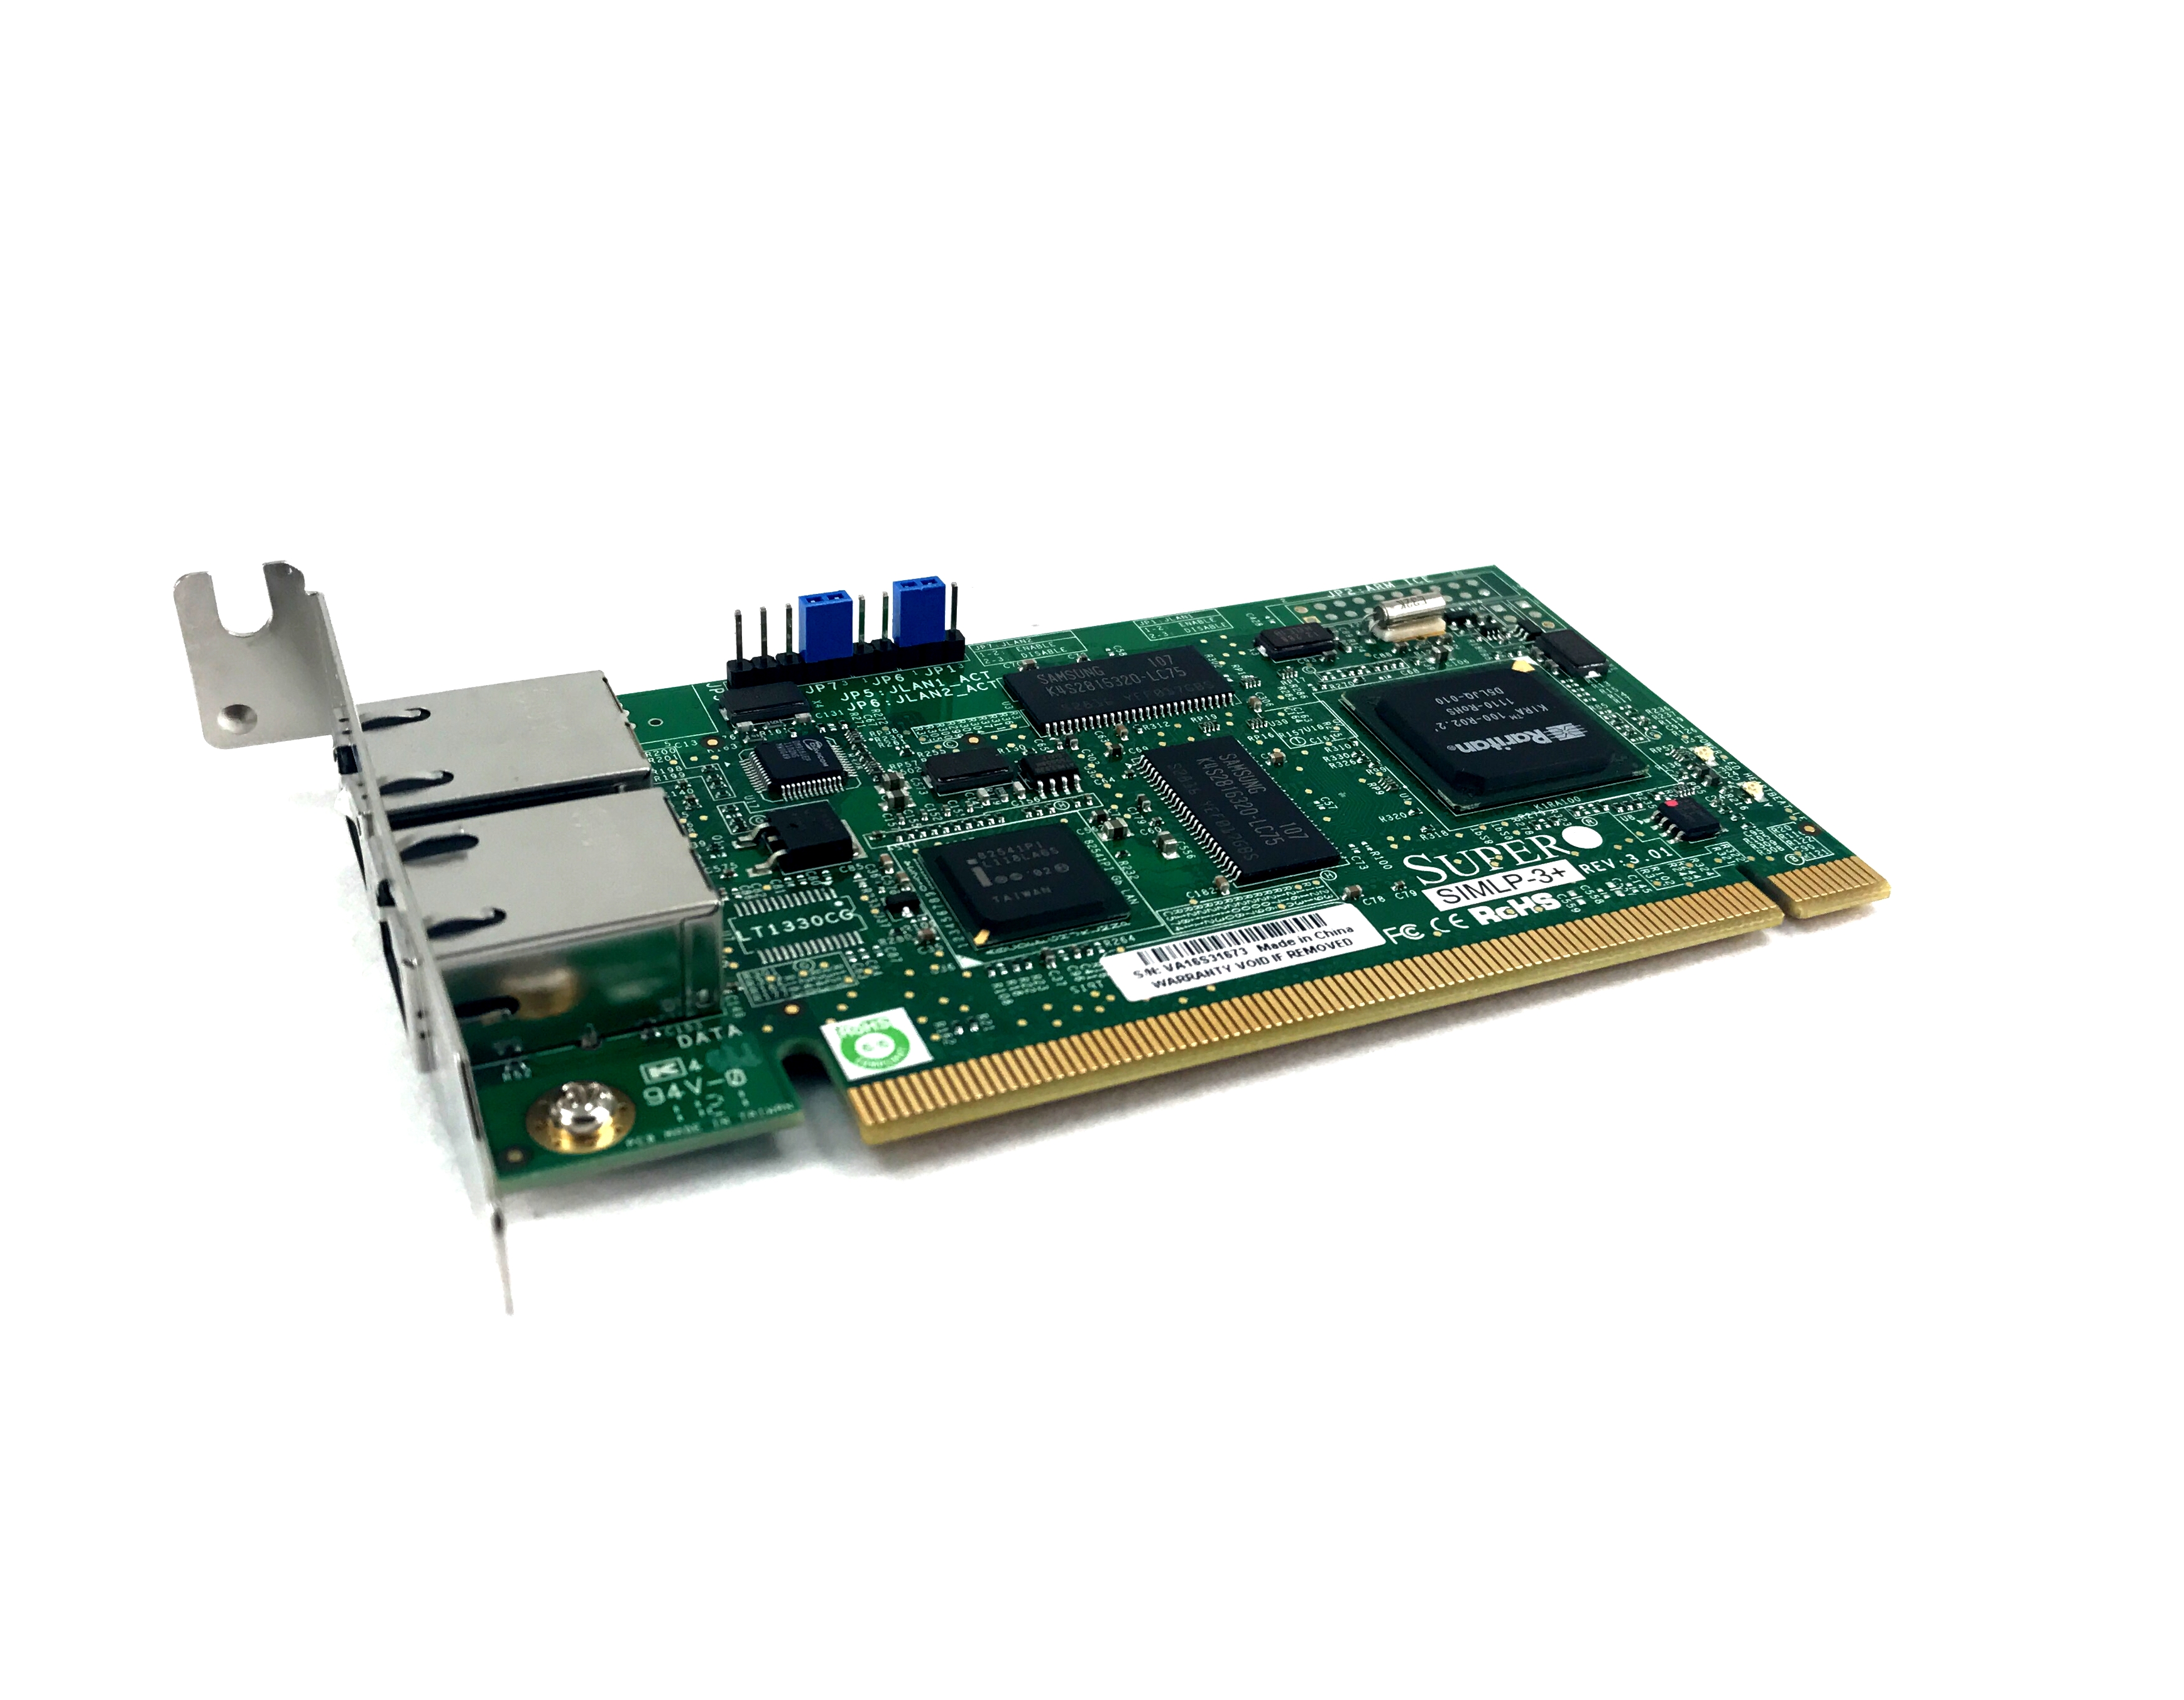 Supermicro Ipmi 2.0 Server Remote Management Adapter Card (SIMLP-3+)